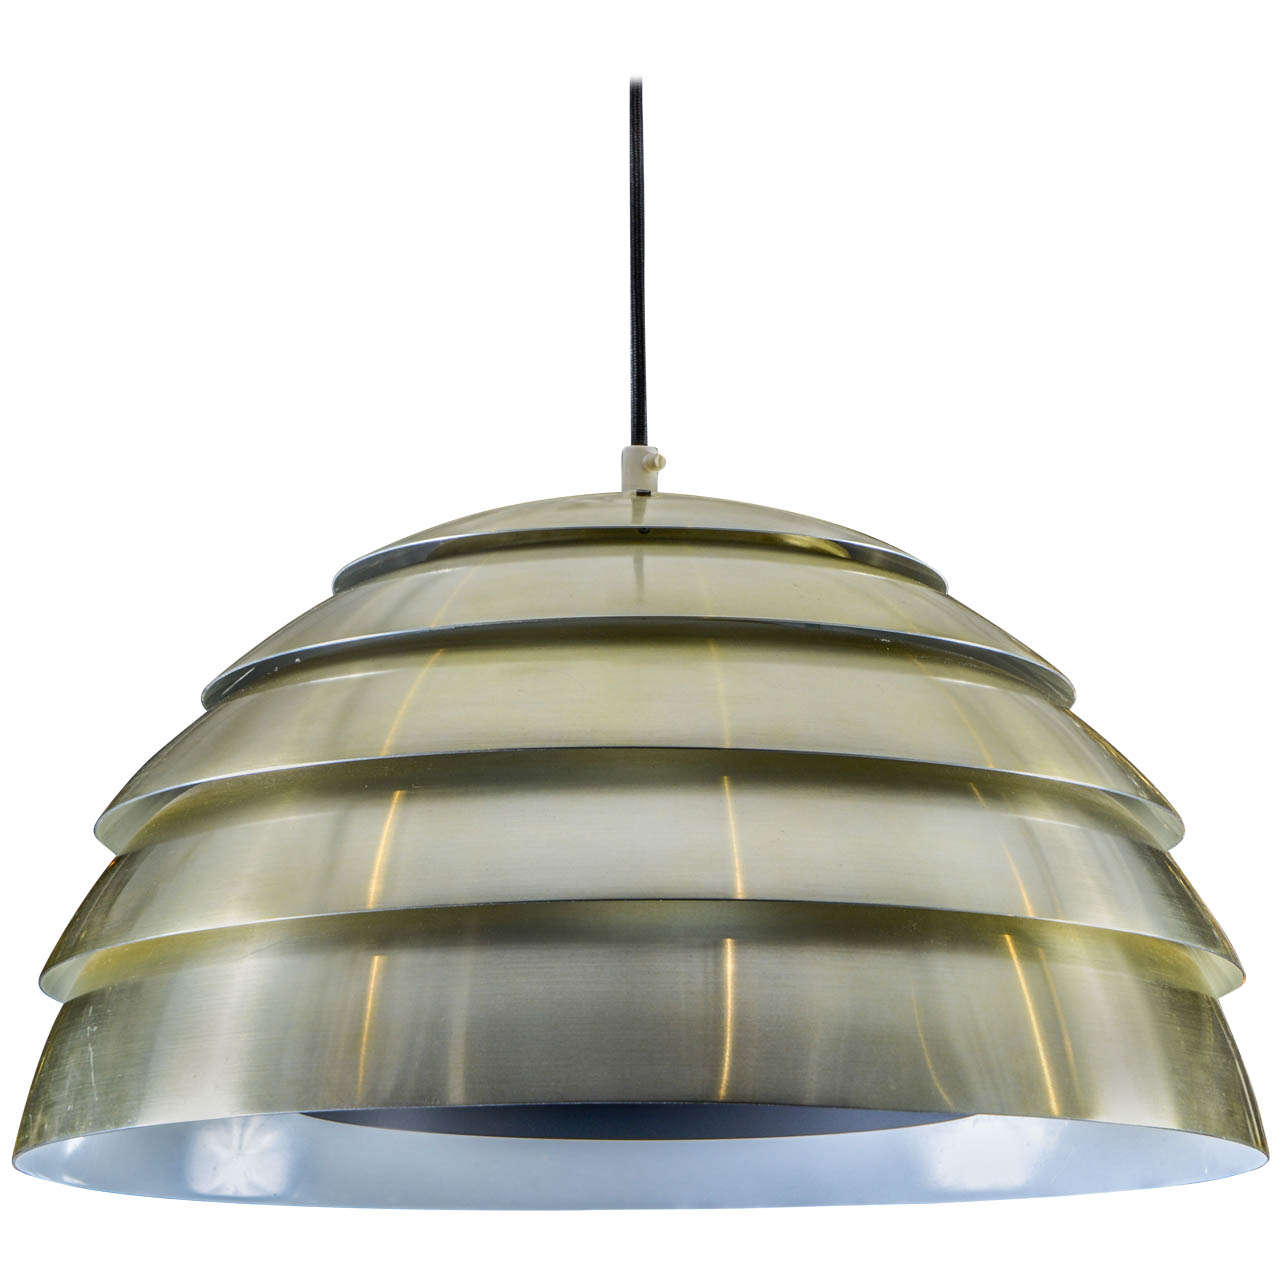 Dome Suspension by Hans Agne Jakobsson for Markaryd